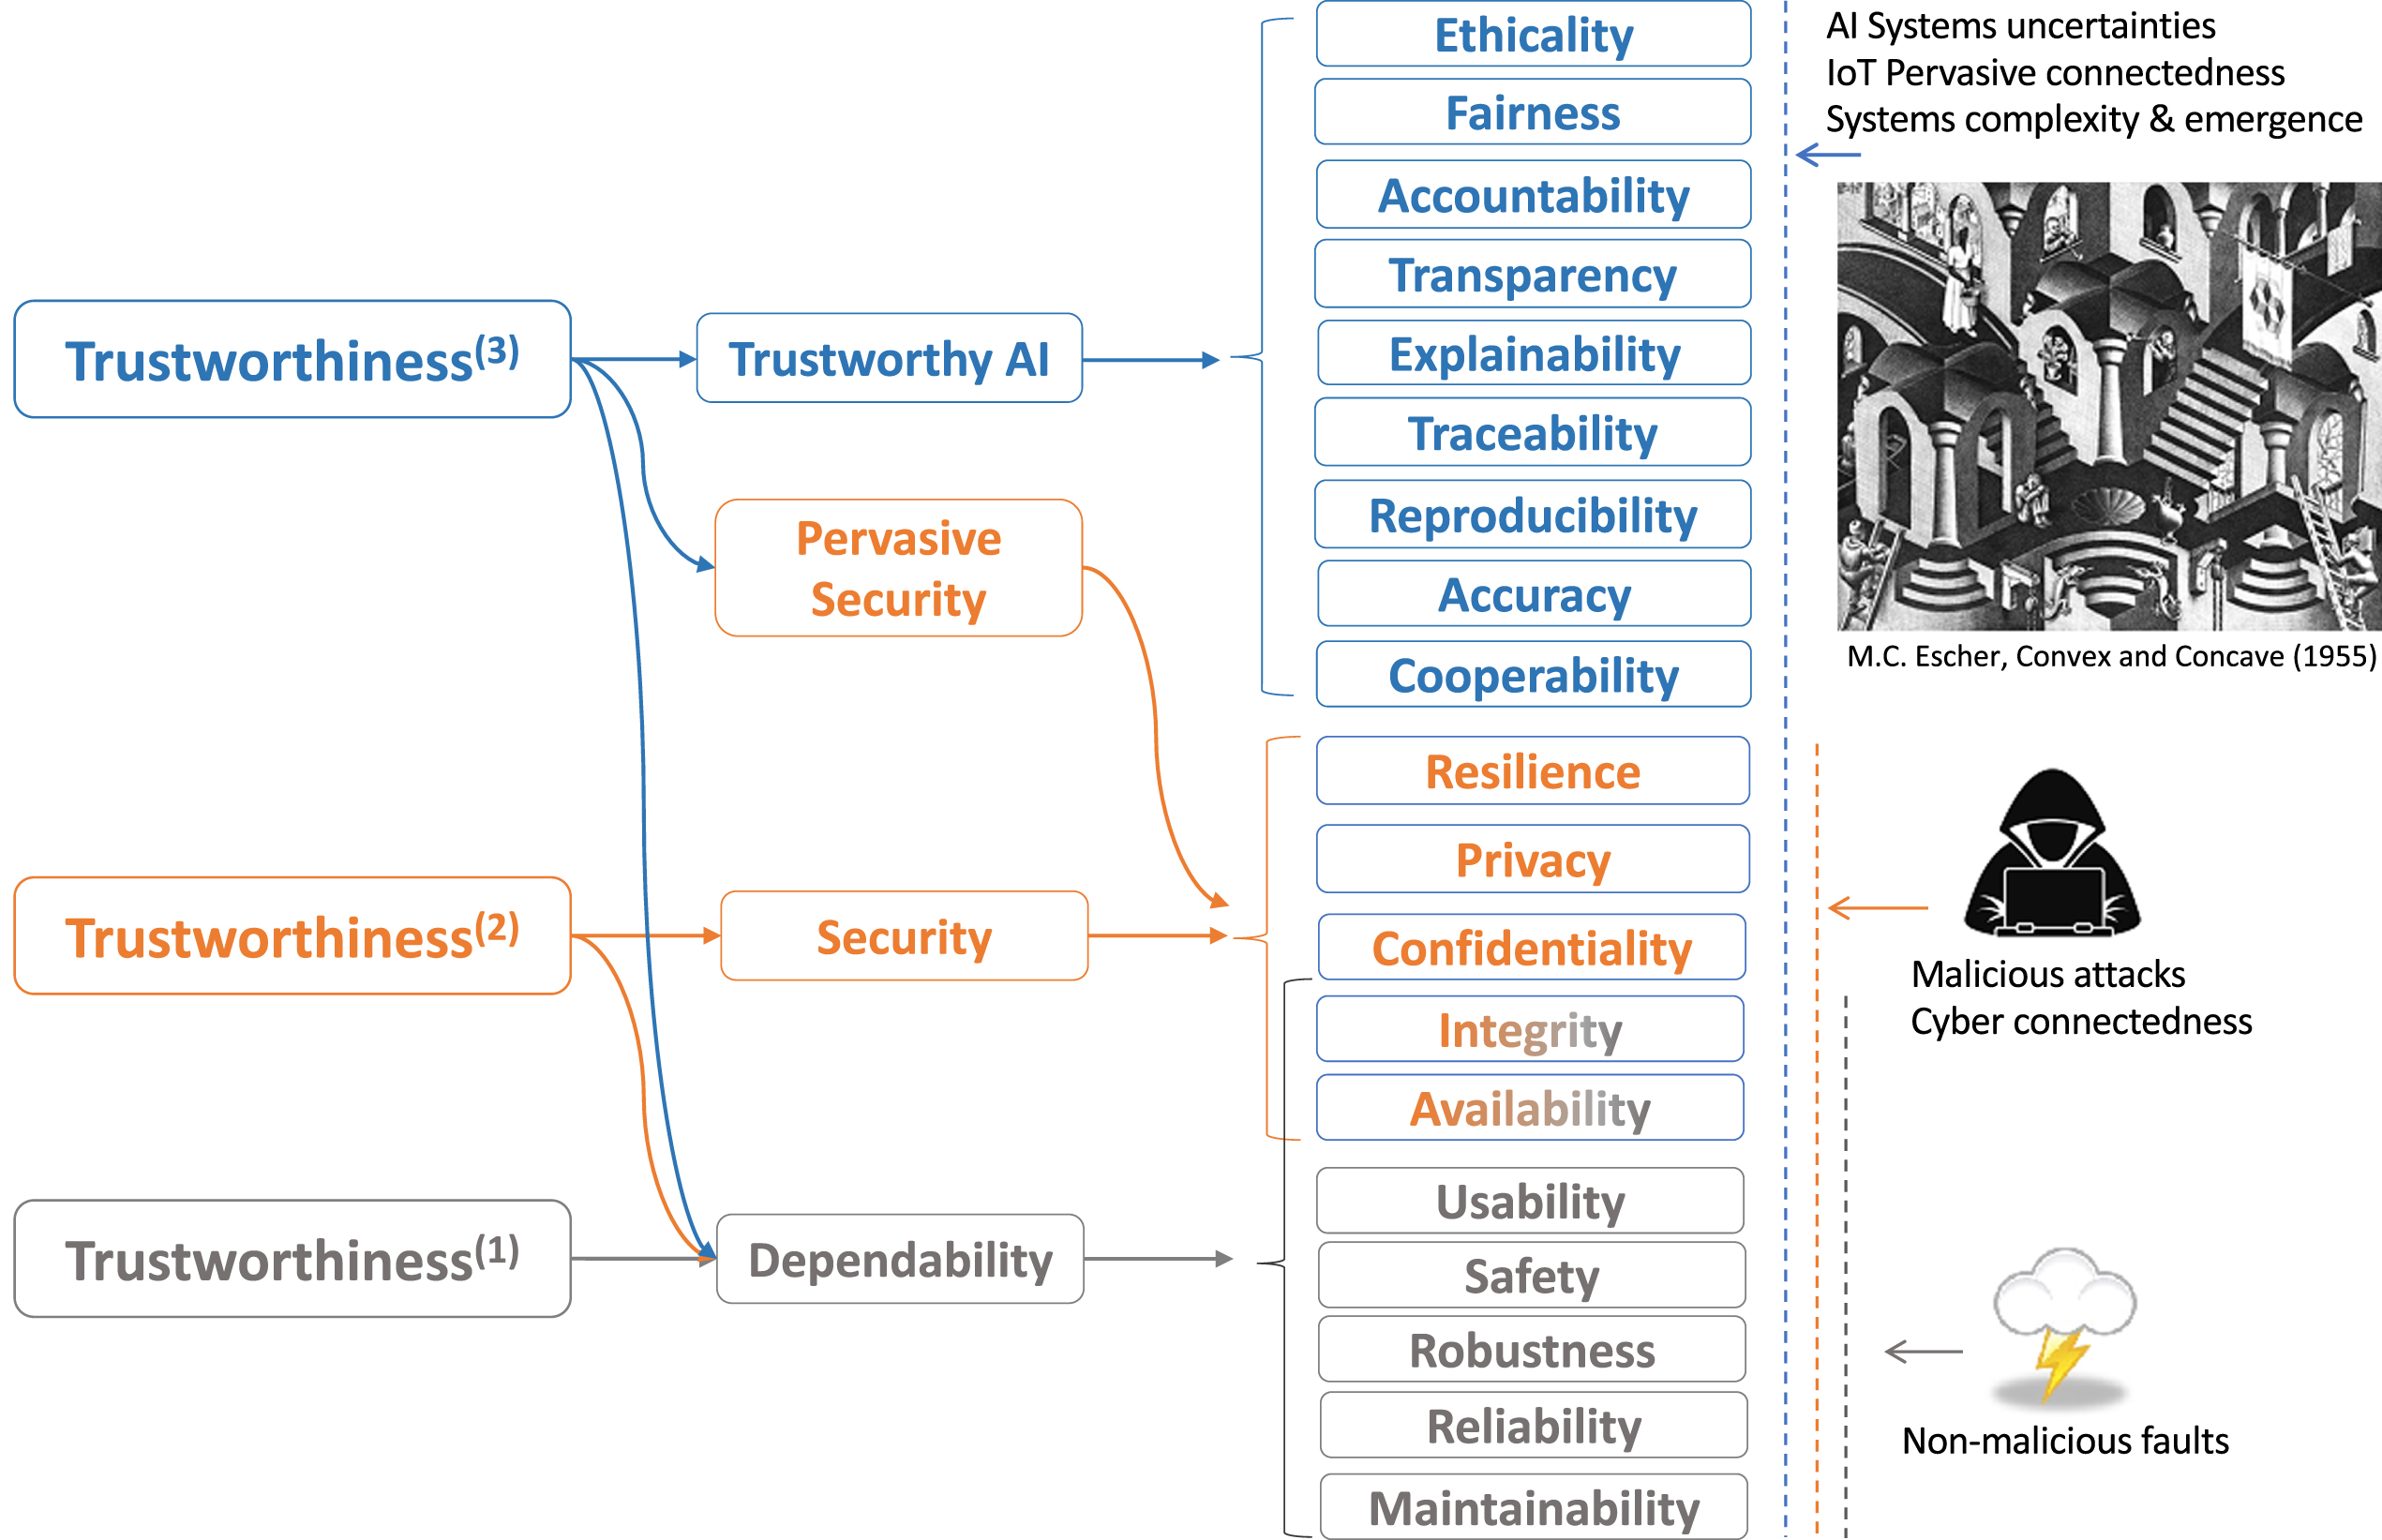 The evolving trustworthiness properties as the evolution of systems with technologies and the sources of concerns.